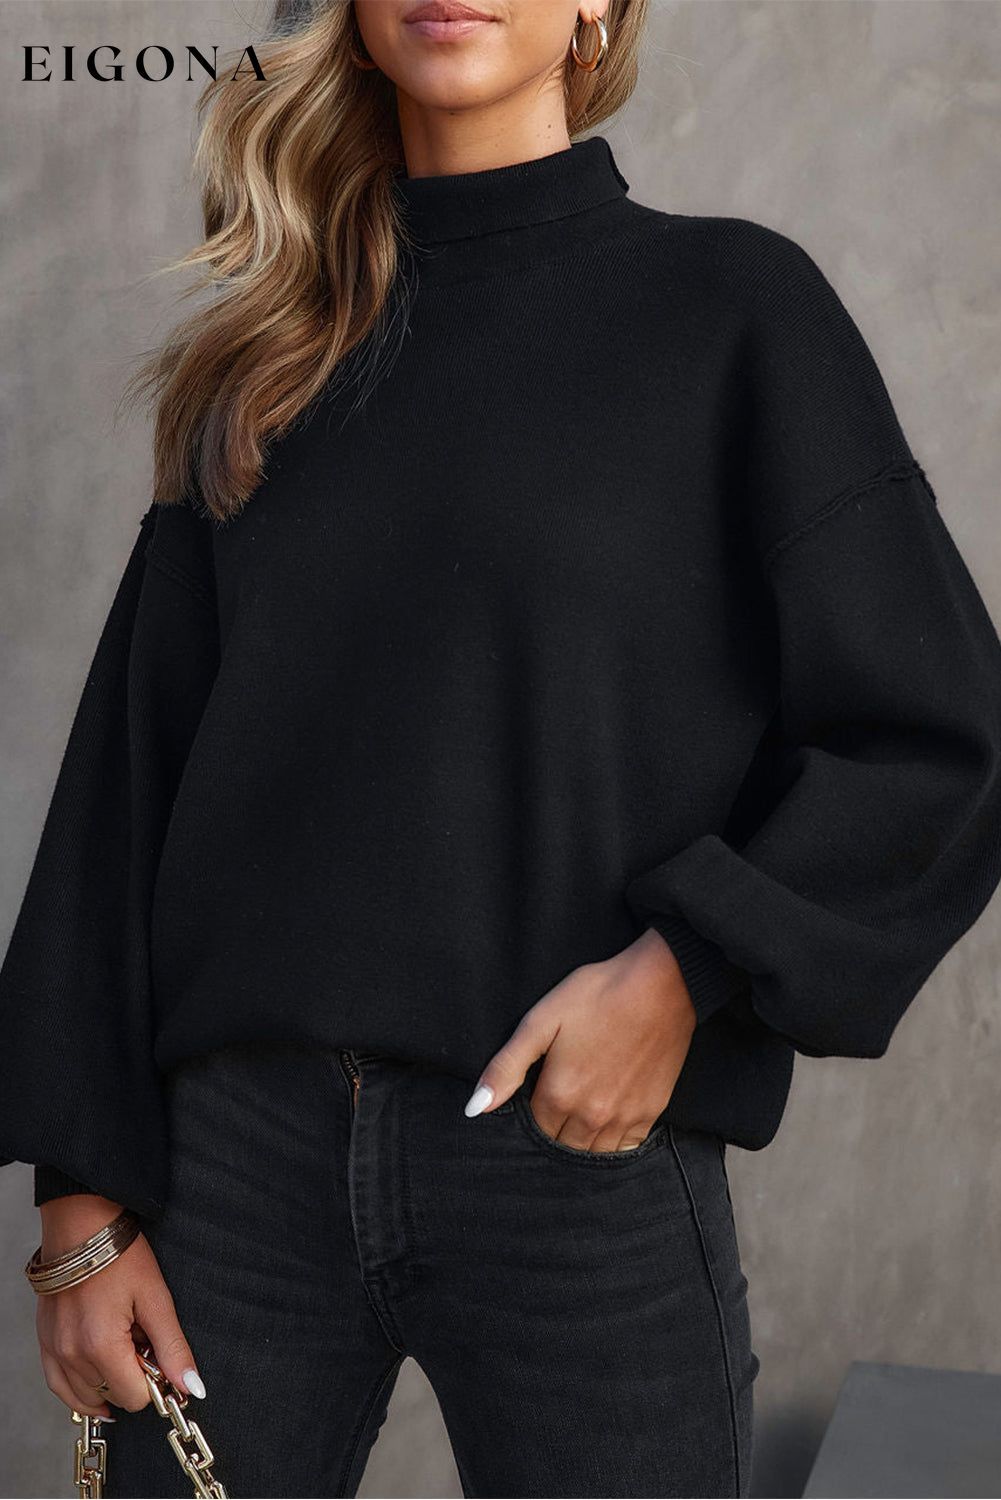 Black Turtleneck Drop Shoulder Bubble Sleeve Knit Sweater Black 50%Viscose+28%Polyester+22%Polyamide All In Stock black sweaters clothes long sleeve dresses long sleeve shirts long sleeve top Occasion Daily Print Solid Color Season Winter Style Elegant